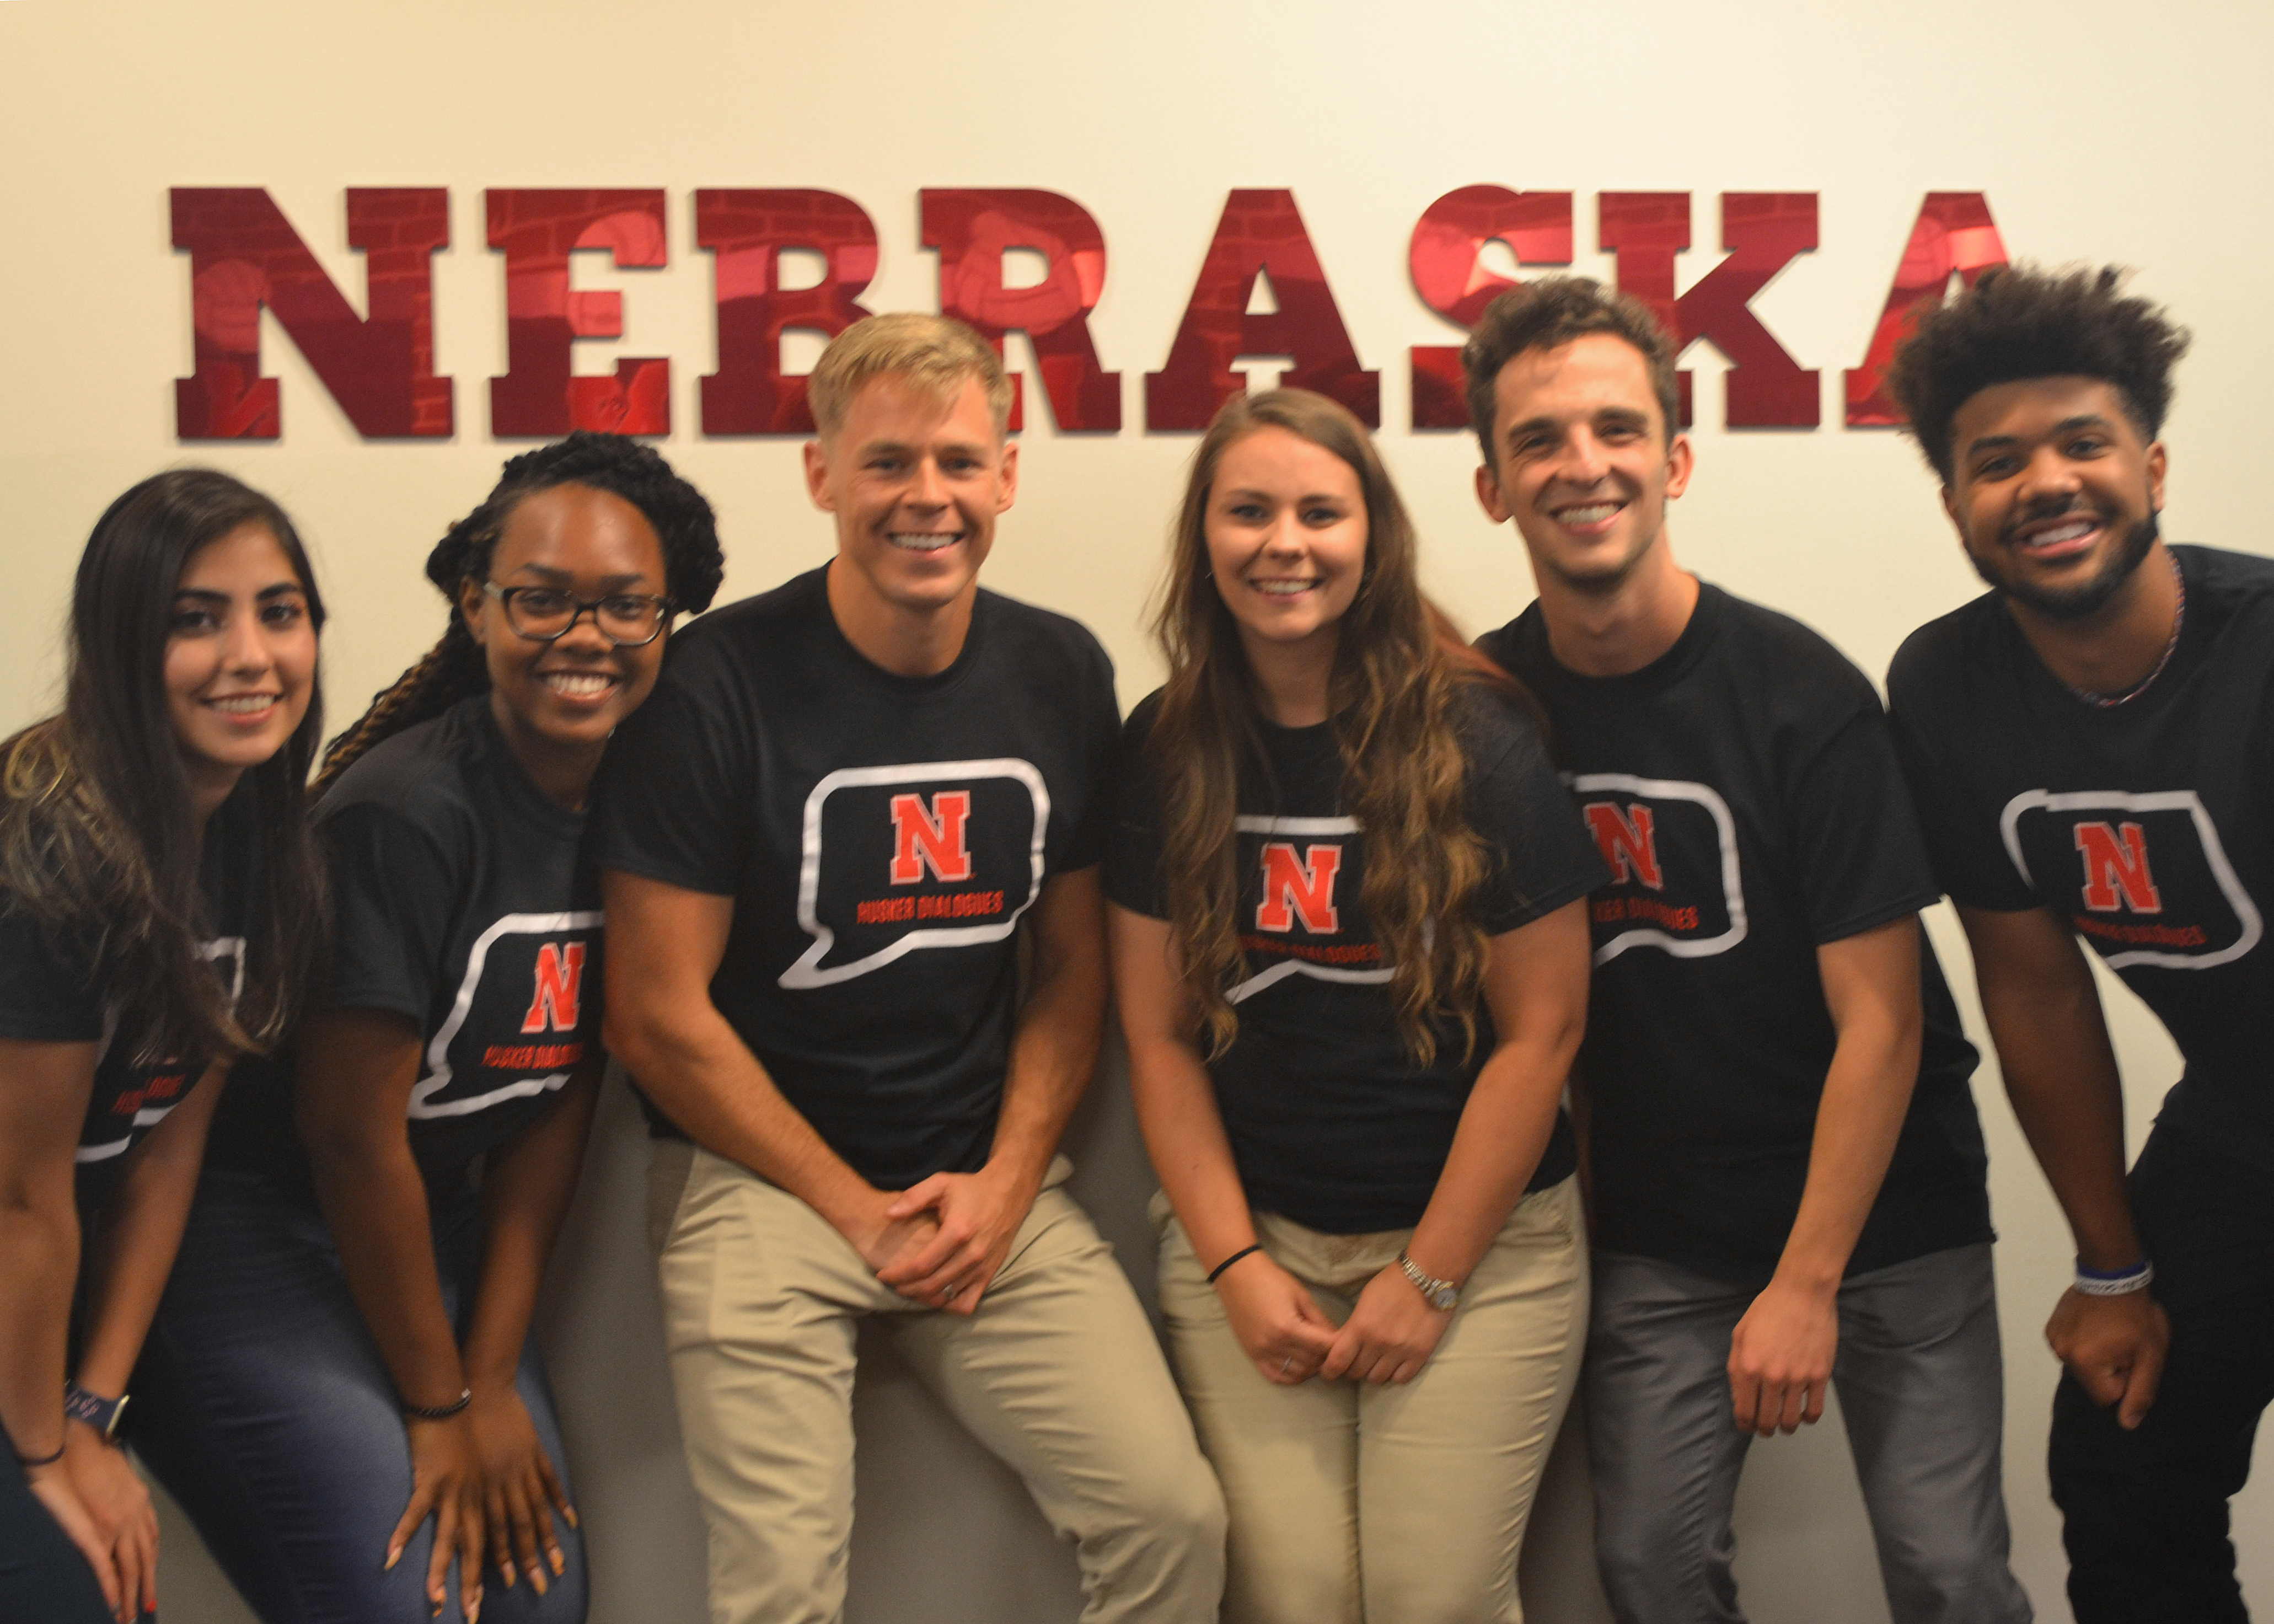 Undergraduates are invited to share their experiences at Husker Dialogues.